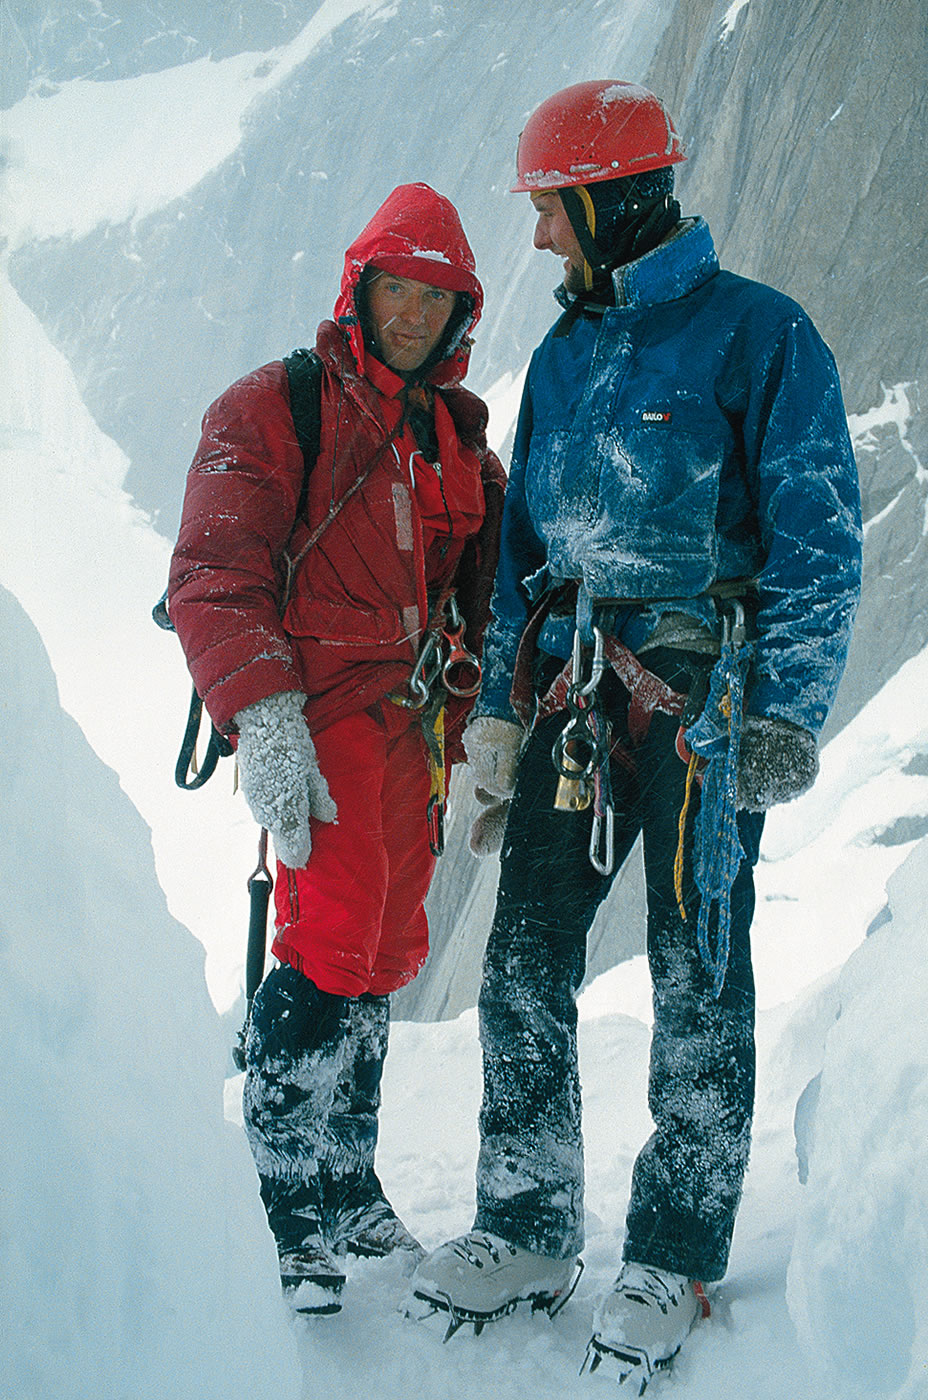 Knez and Jegli on Torre Egger (2850m), 1986, the year that they completed the first ascent of Psycho Vertical (5.11b A3 90 degrees, 900m) on the peak's south face, in a 22-hour round-trip push to the summit after fixing the first 550 meters. [Photo] Silvo Karo